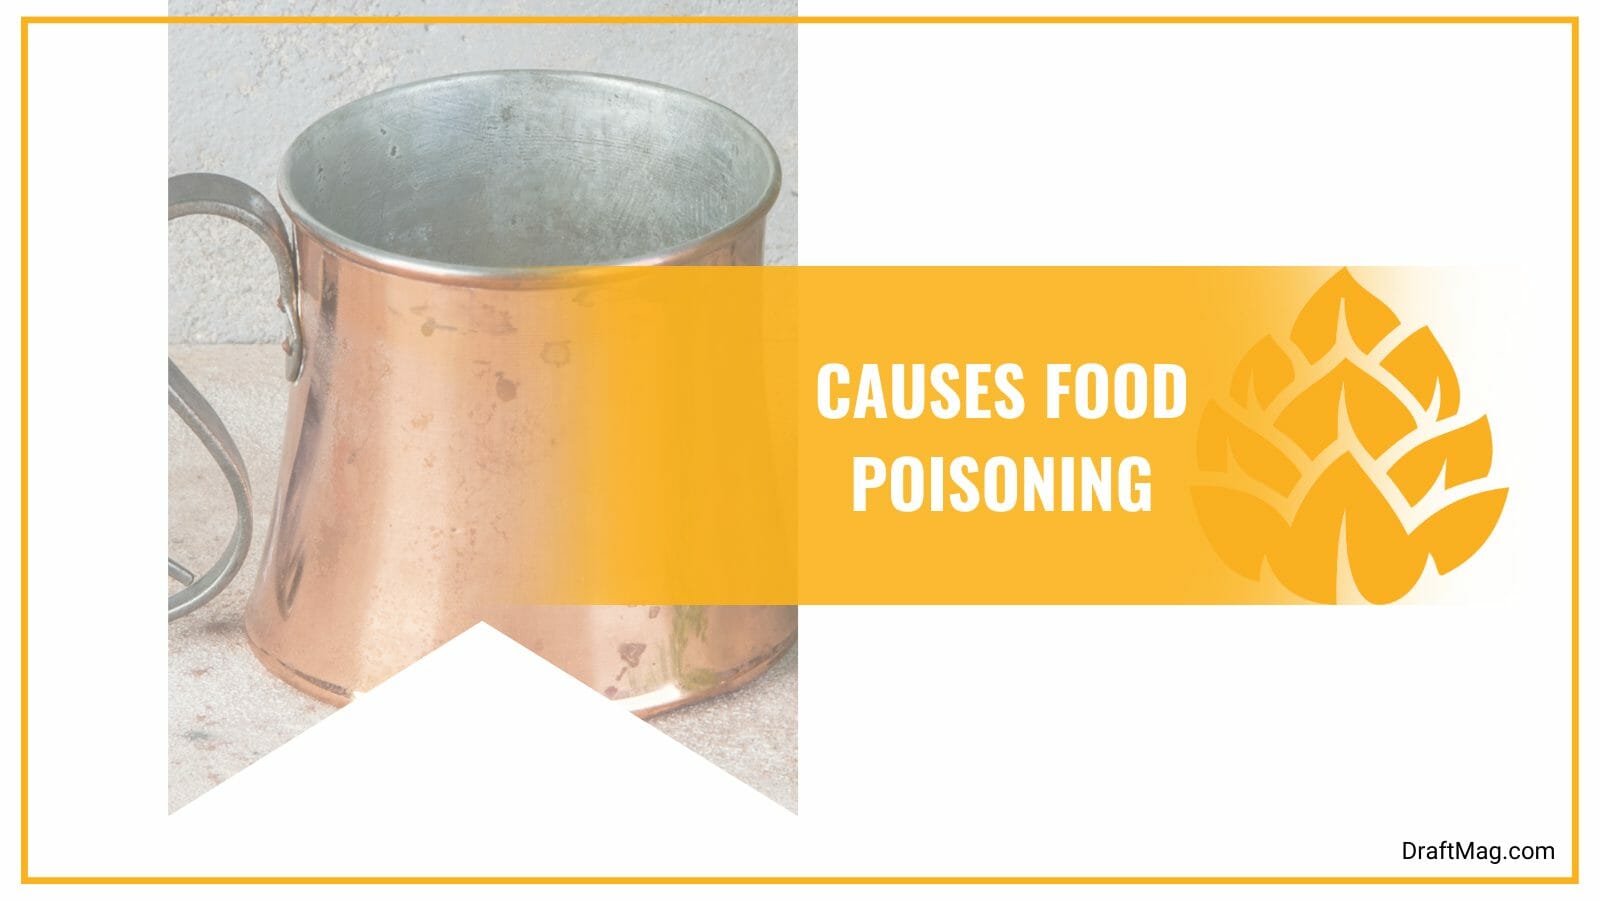 Copper mugs causes food poisoning